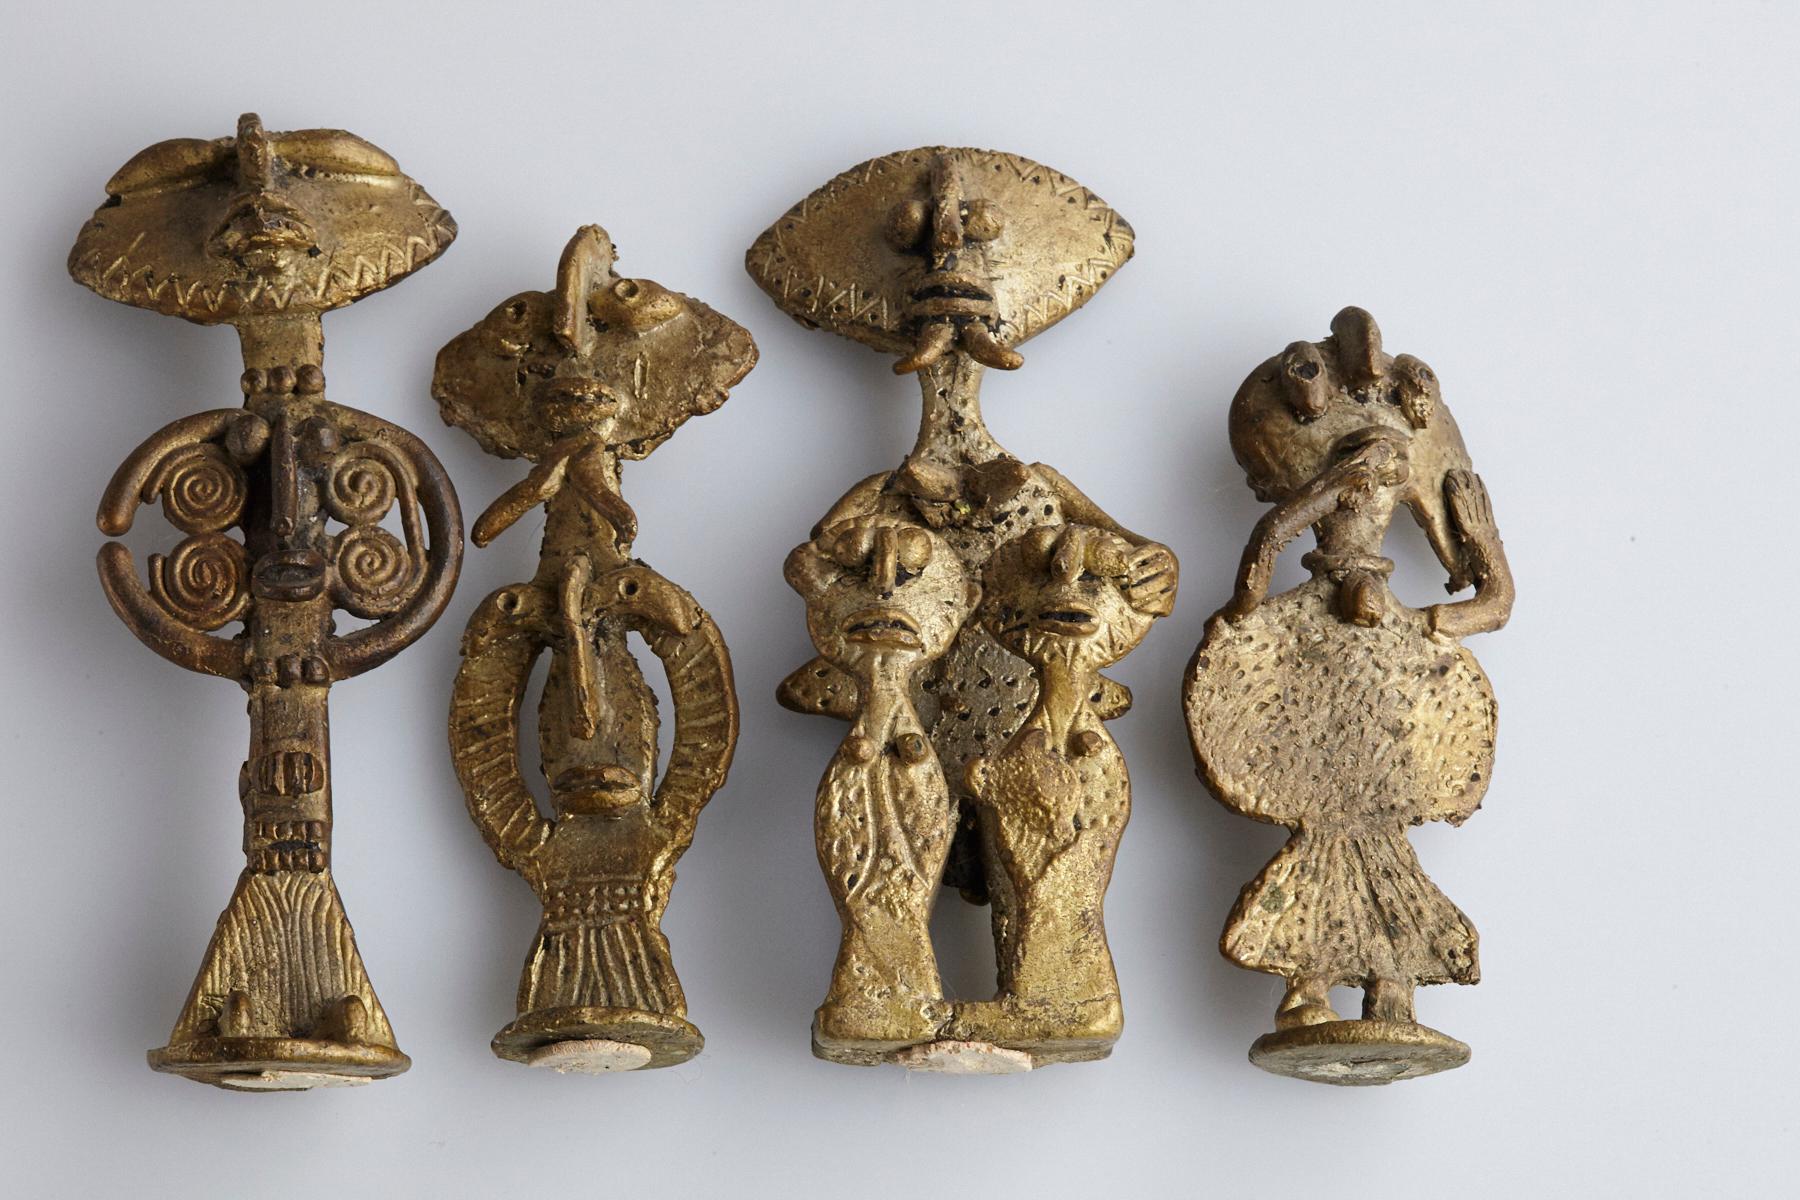 Grouping of Akan Ashanti cast bronze figurines. The Ashanti or Asante People from Ghana have a rich tradition of crafting bronze pieces to commemorate important figures from their culture or people from their tribe or family. 
The figurines are